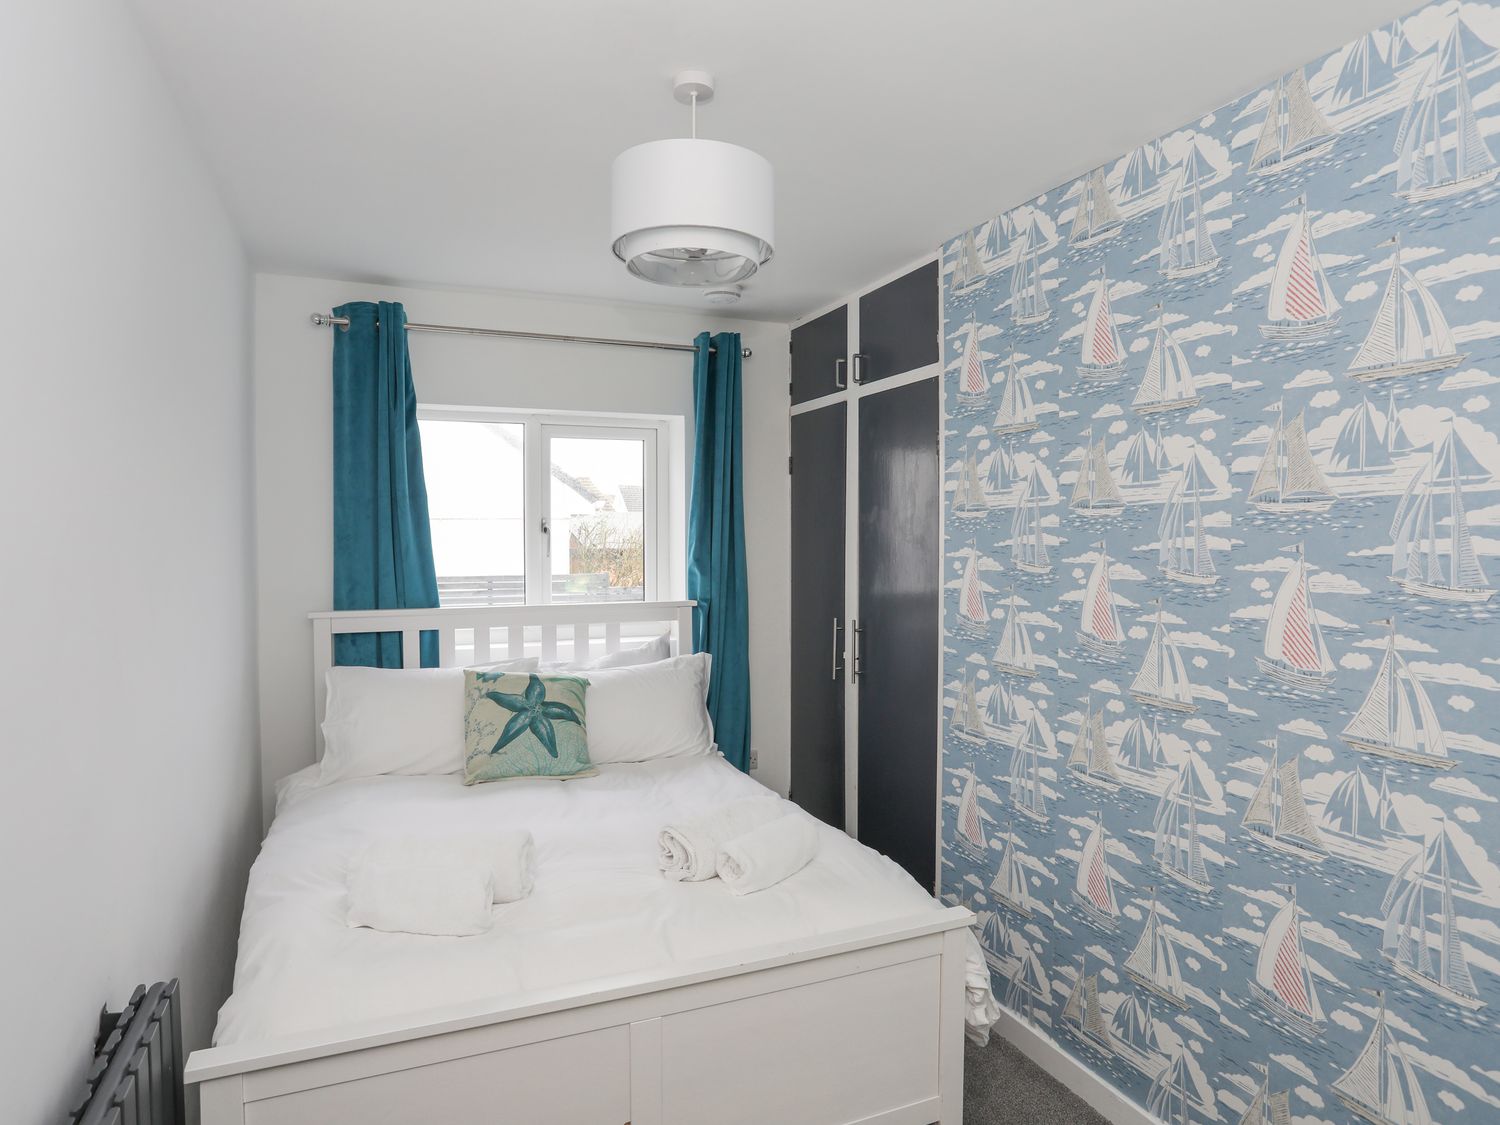 Clydfan, No 1 Trearddur Road in Trearddur Bay on the Isle of Anglesey. Pet-friendly cottage. Hot tub